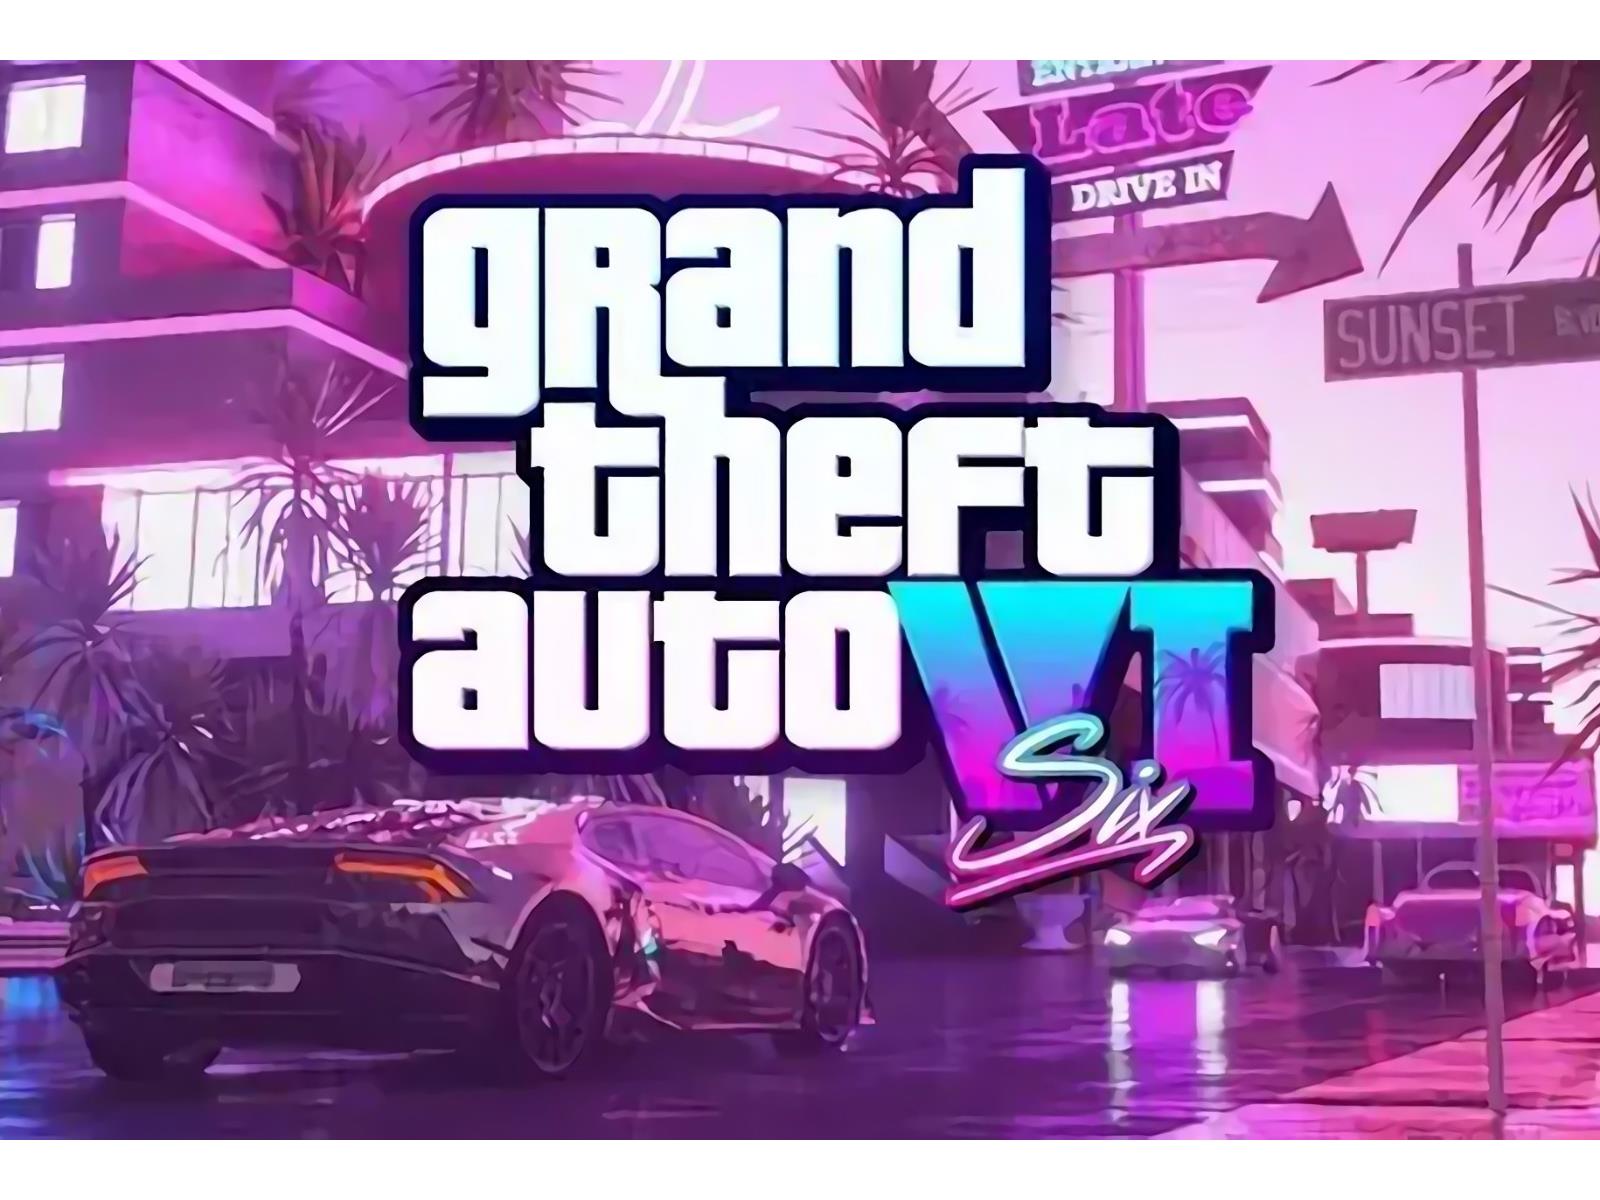 Grand Theft Auto 6 Set To Be The Most Expensive Video Game Of All Time